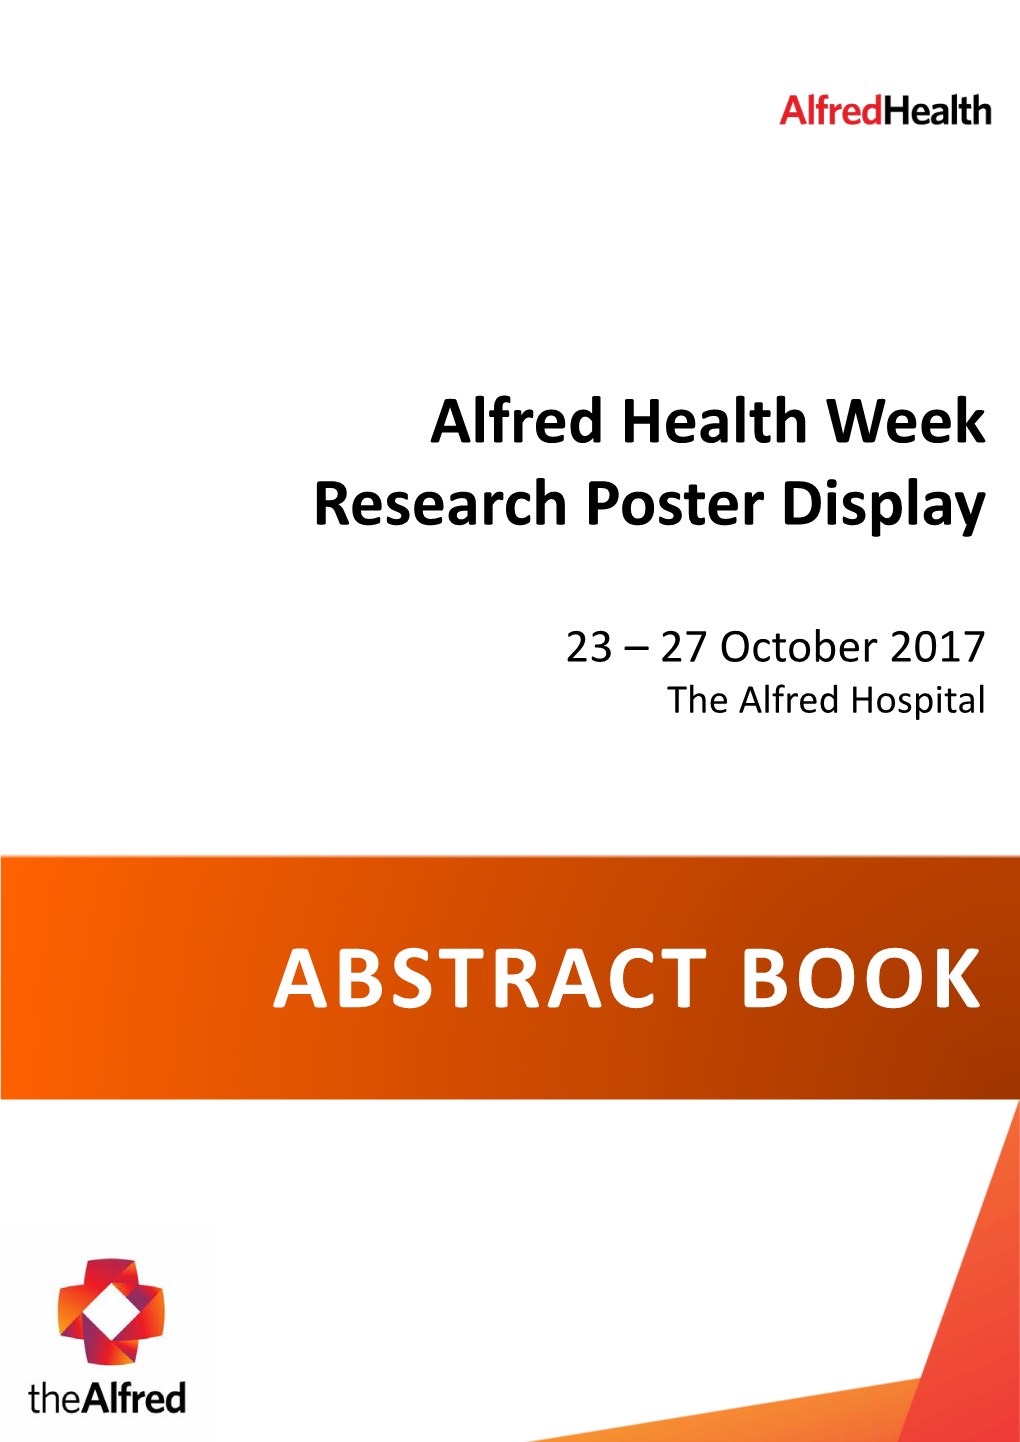 Abstract Book Alfred Health Week Research Poster Display 23 – 27 October 2017